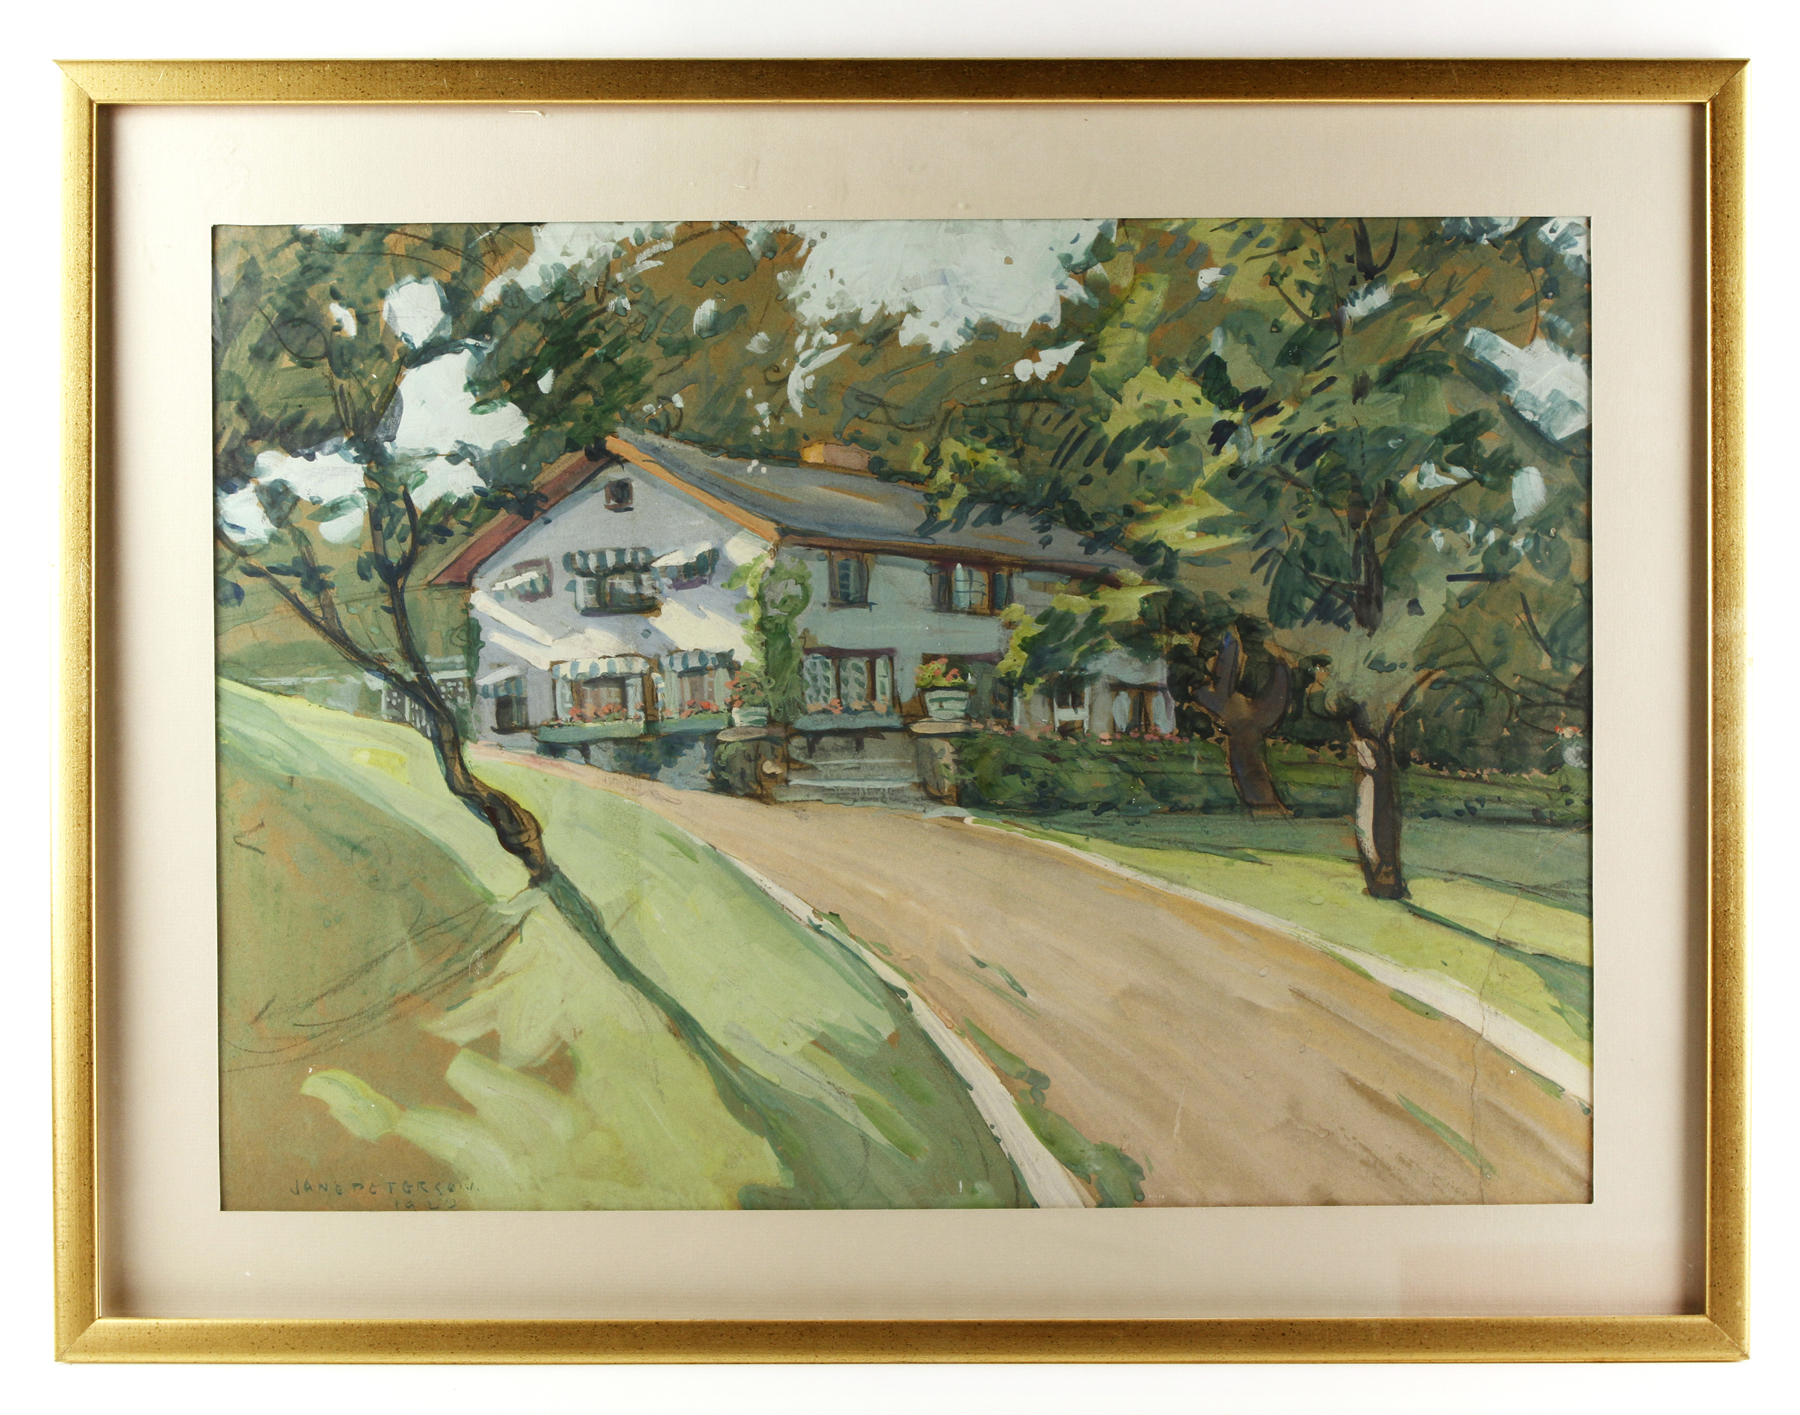 Jane Peterson (American, 1876-1965), "Ossining," gouache on paper